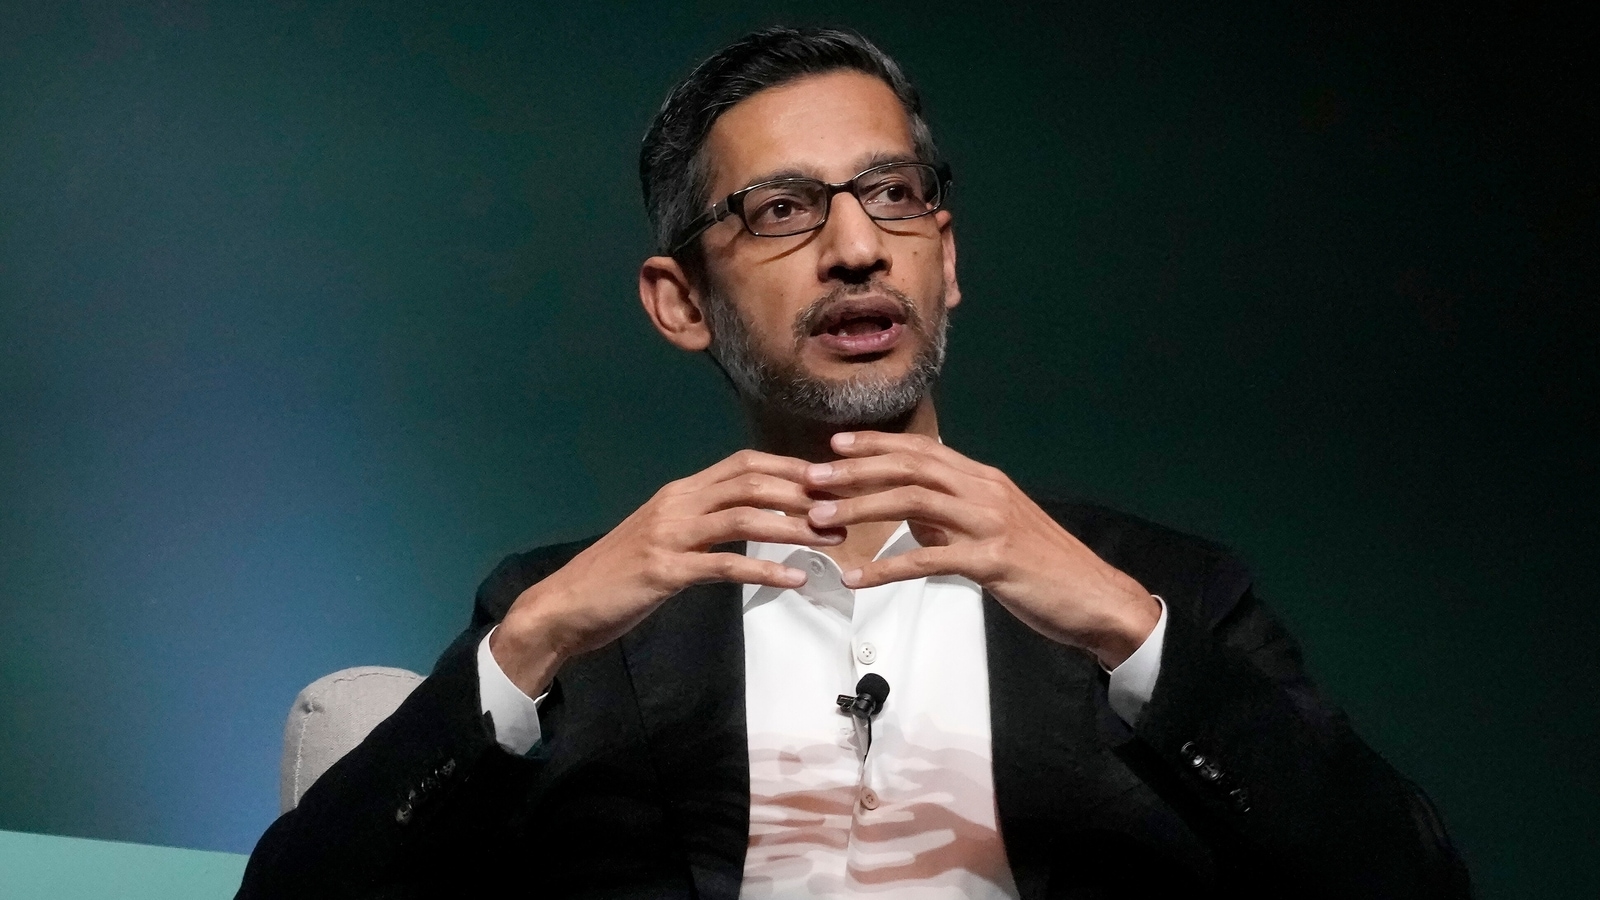 CEO Sundar Pichai tells what is significant for AI chatbots to be thriving amid Google Gemini criticisms